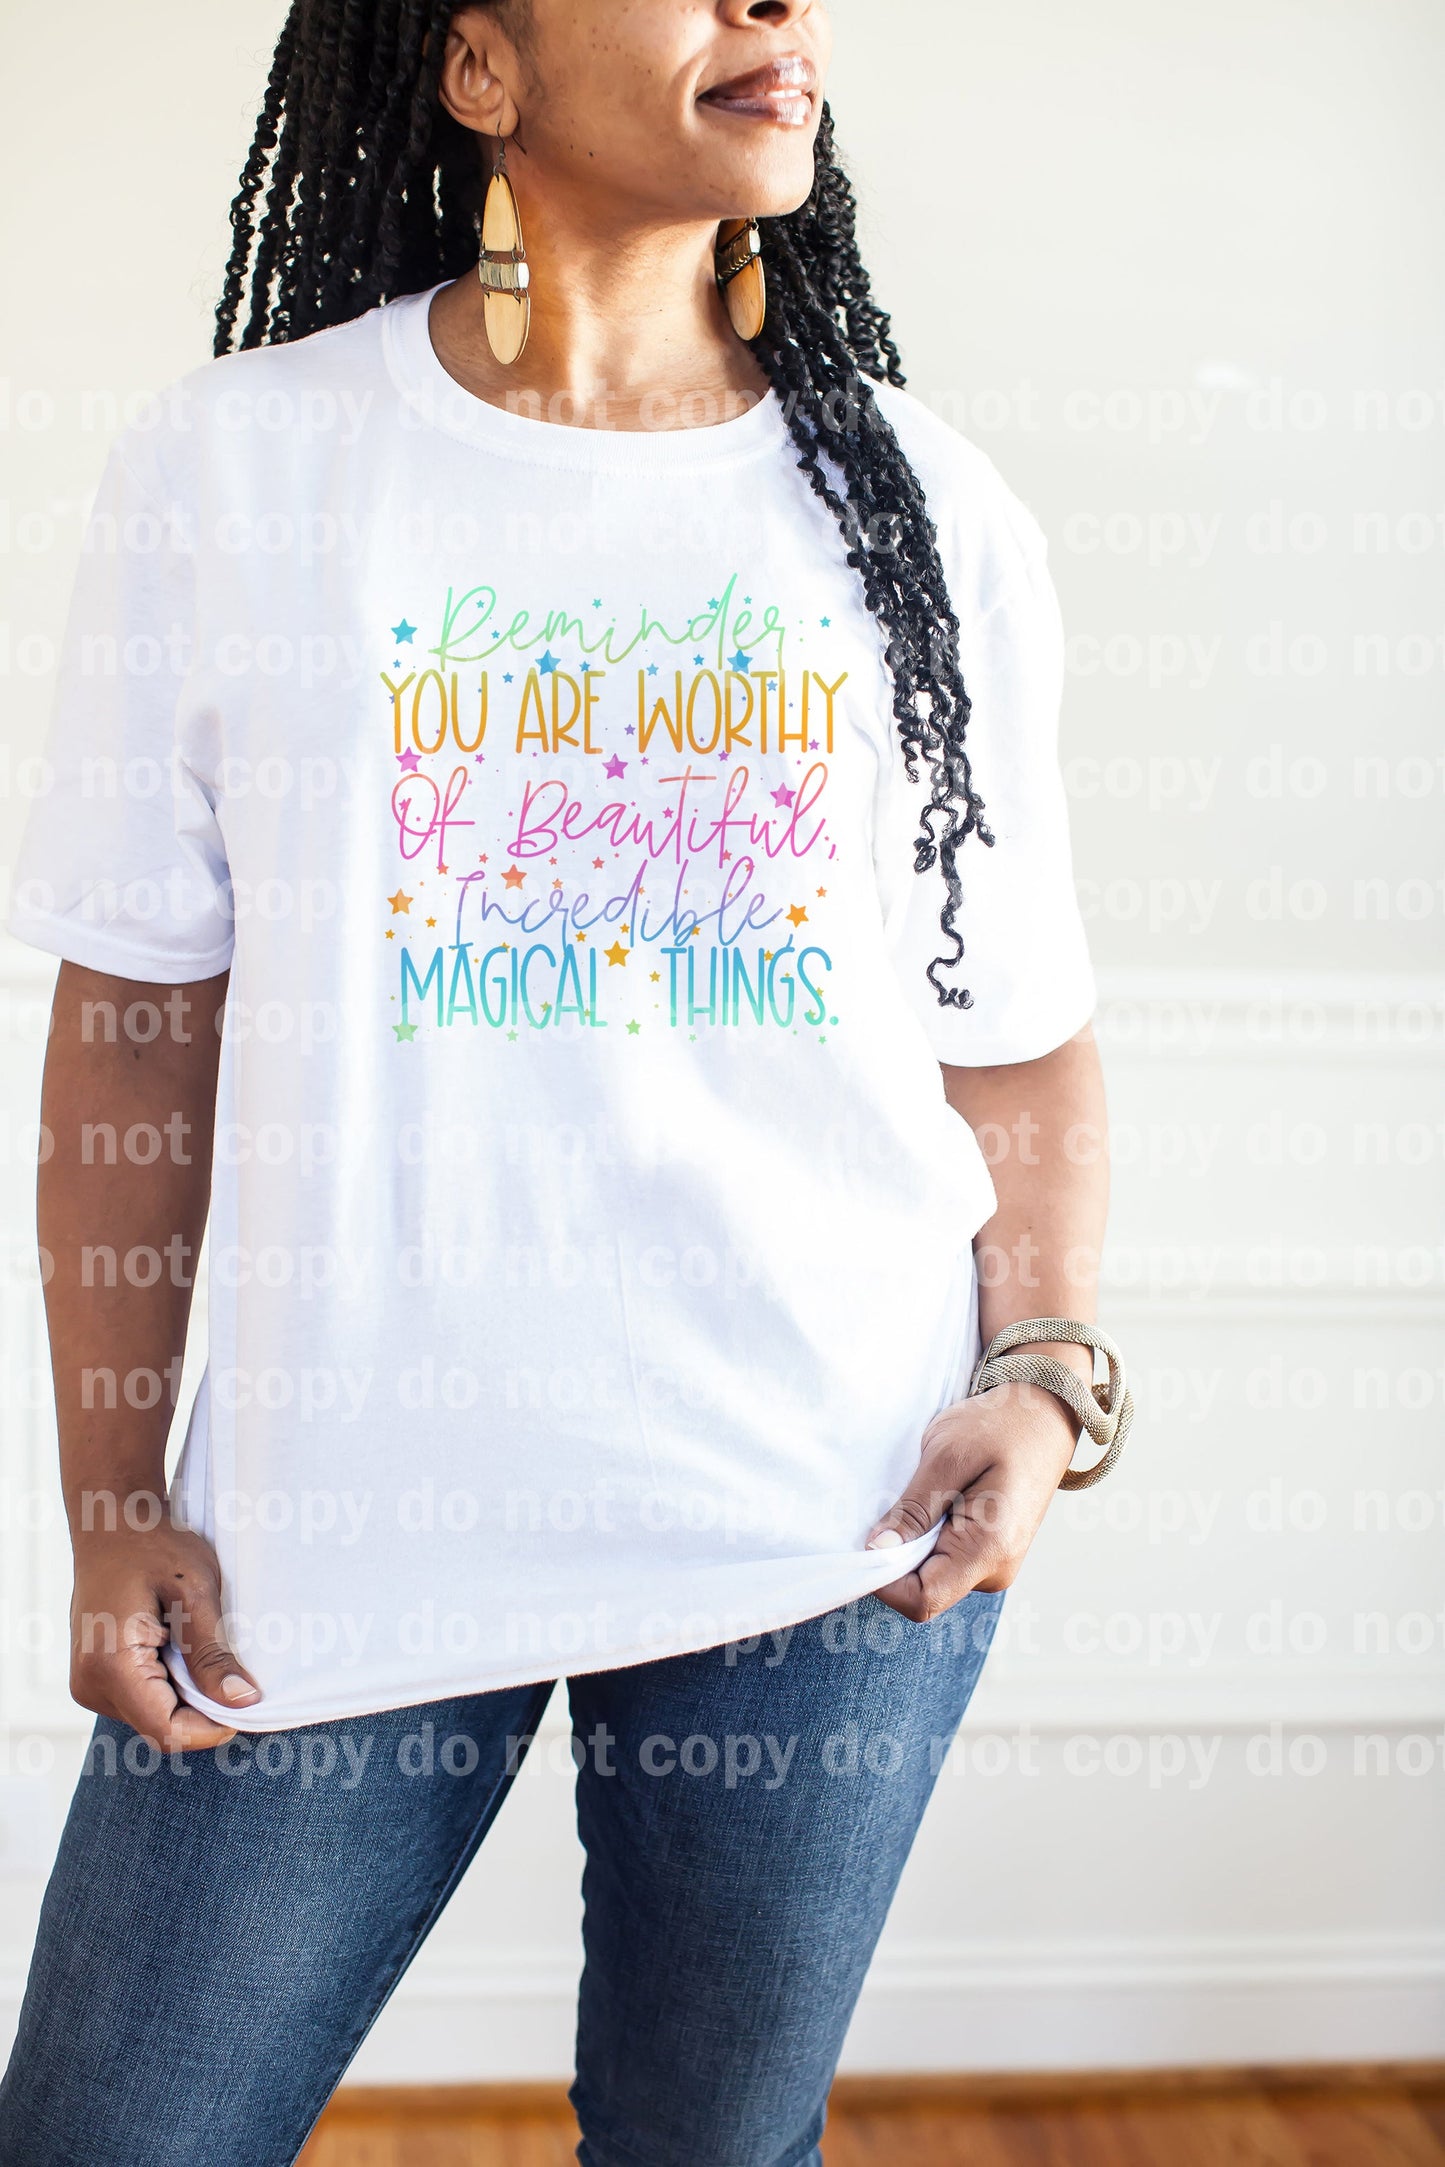 Reminder You Are Worthy Of Beautiful Incredible Magical Things with Pocket Option Dream Print or Sublimation Print